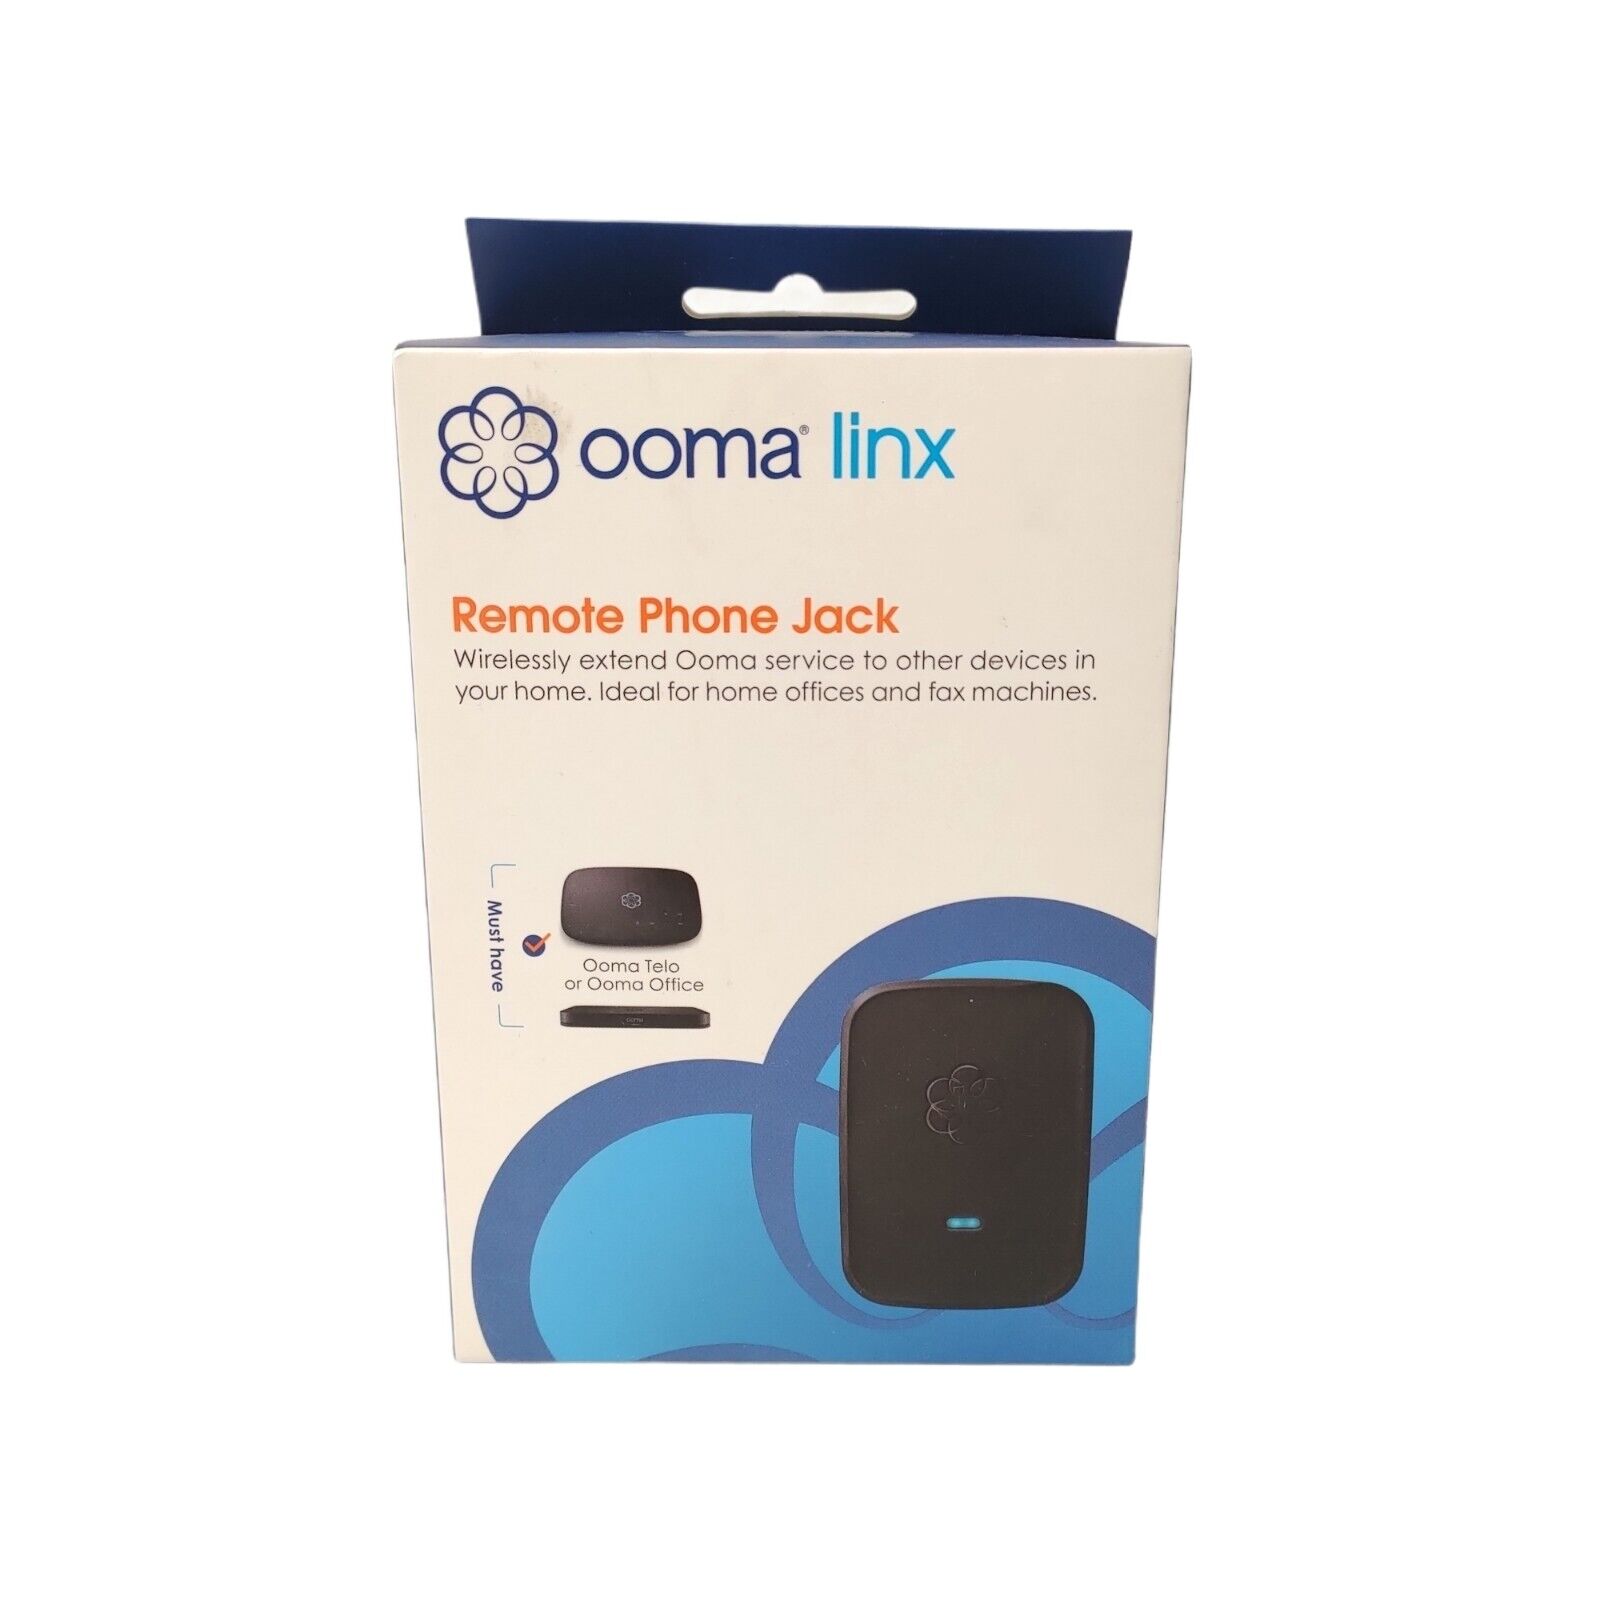 Ooma Linx Wireless Jack for Ooma Telo and Ooma Office VoIP systems